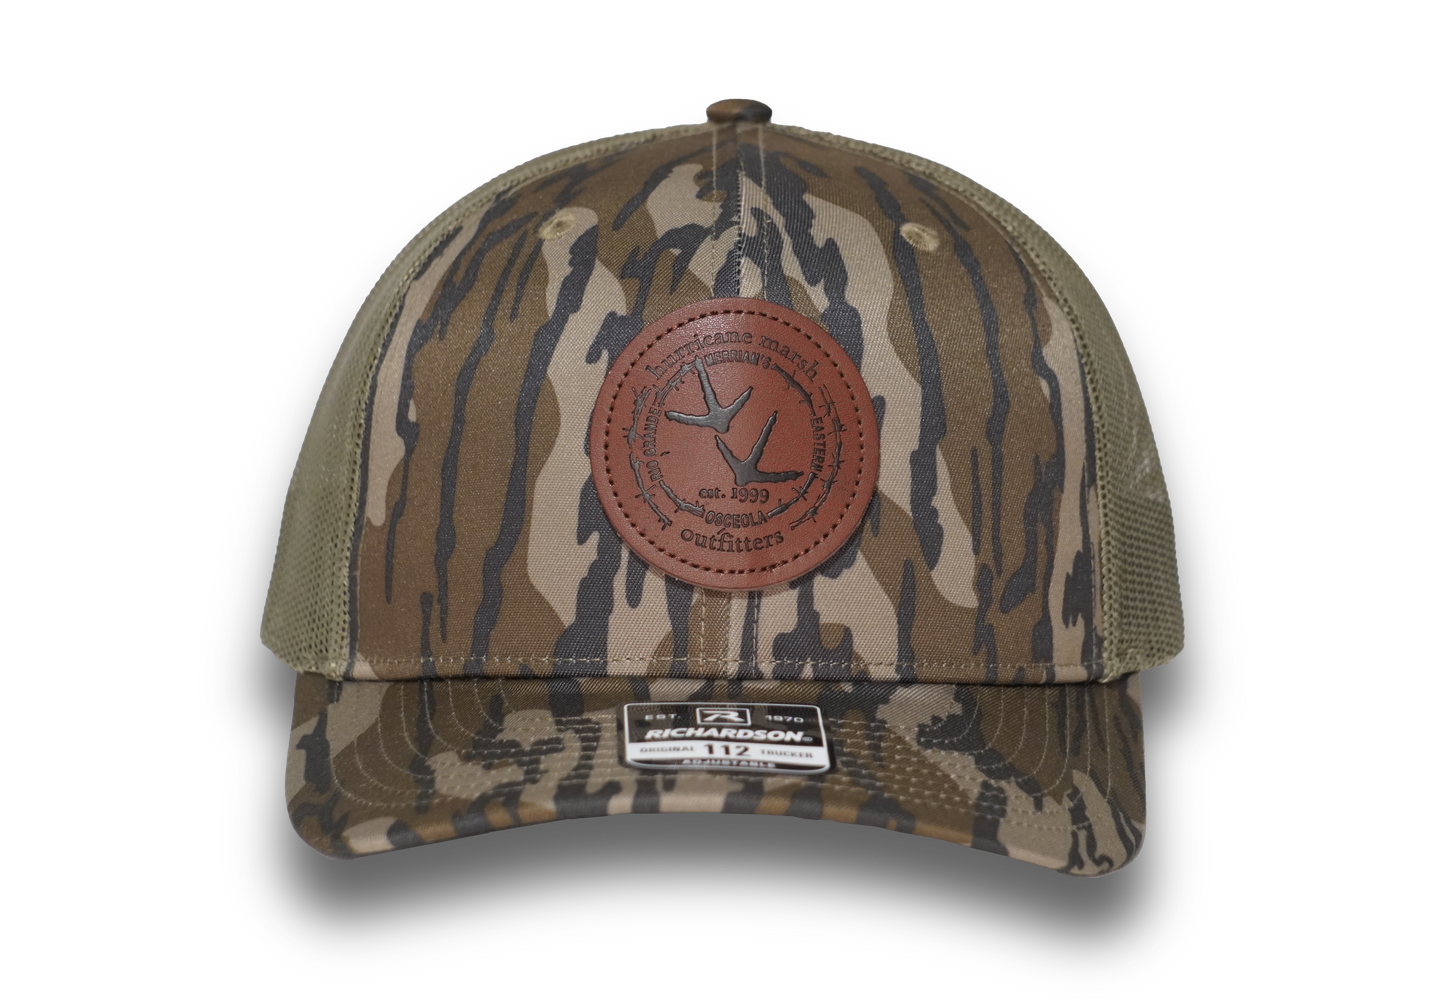 Remember When Leather Turkey Patch Hats